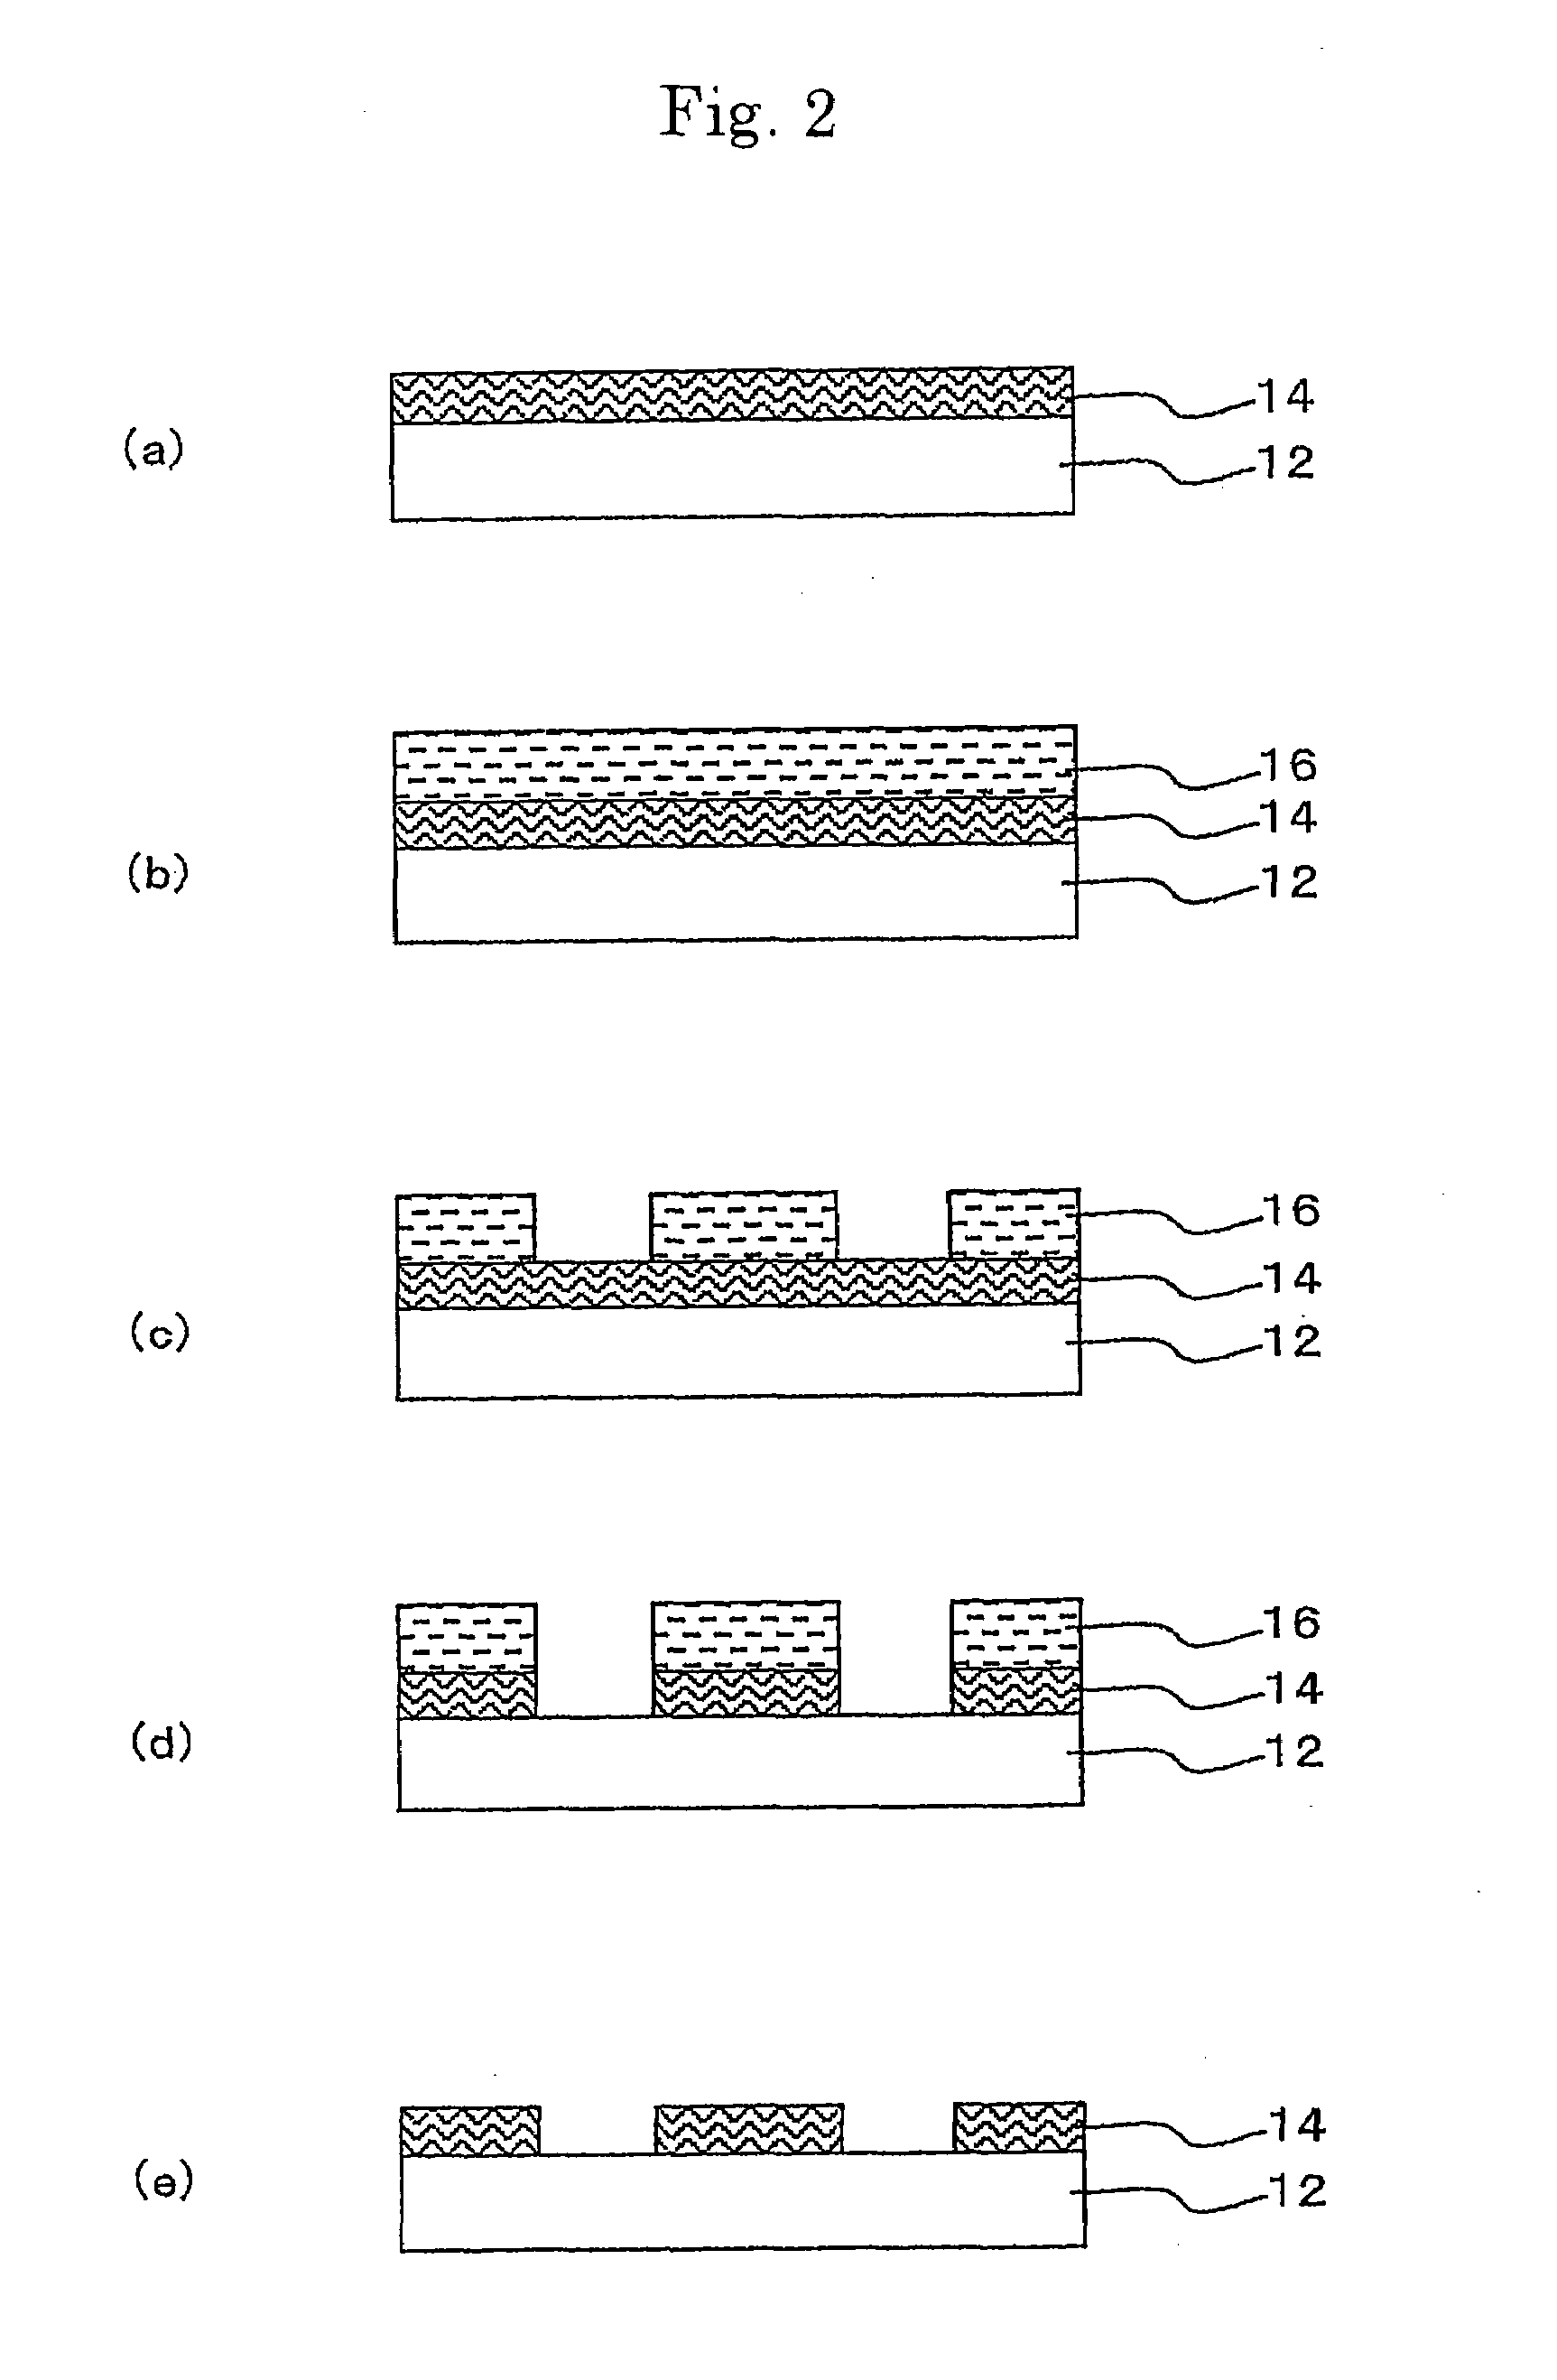 Resistance element, method of manufacturing the same, and thermistor